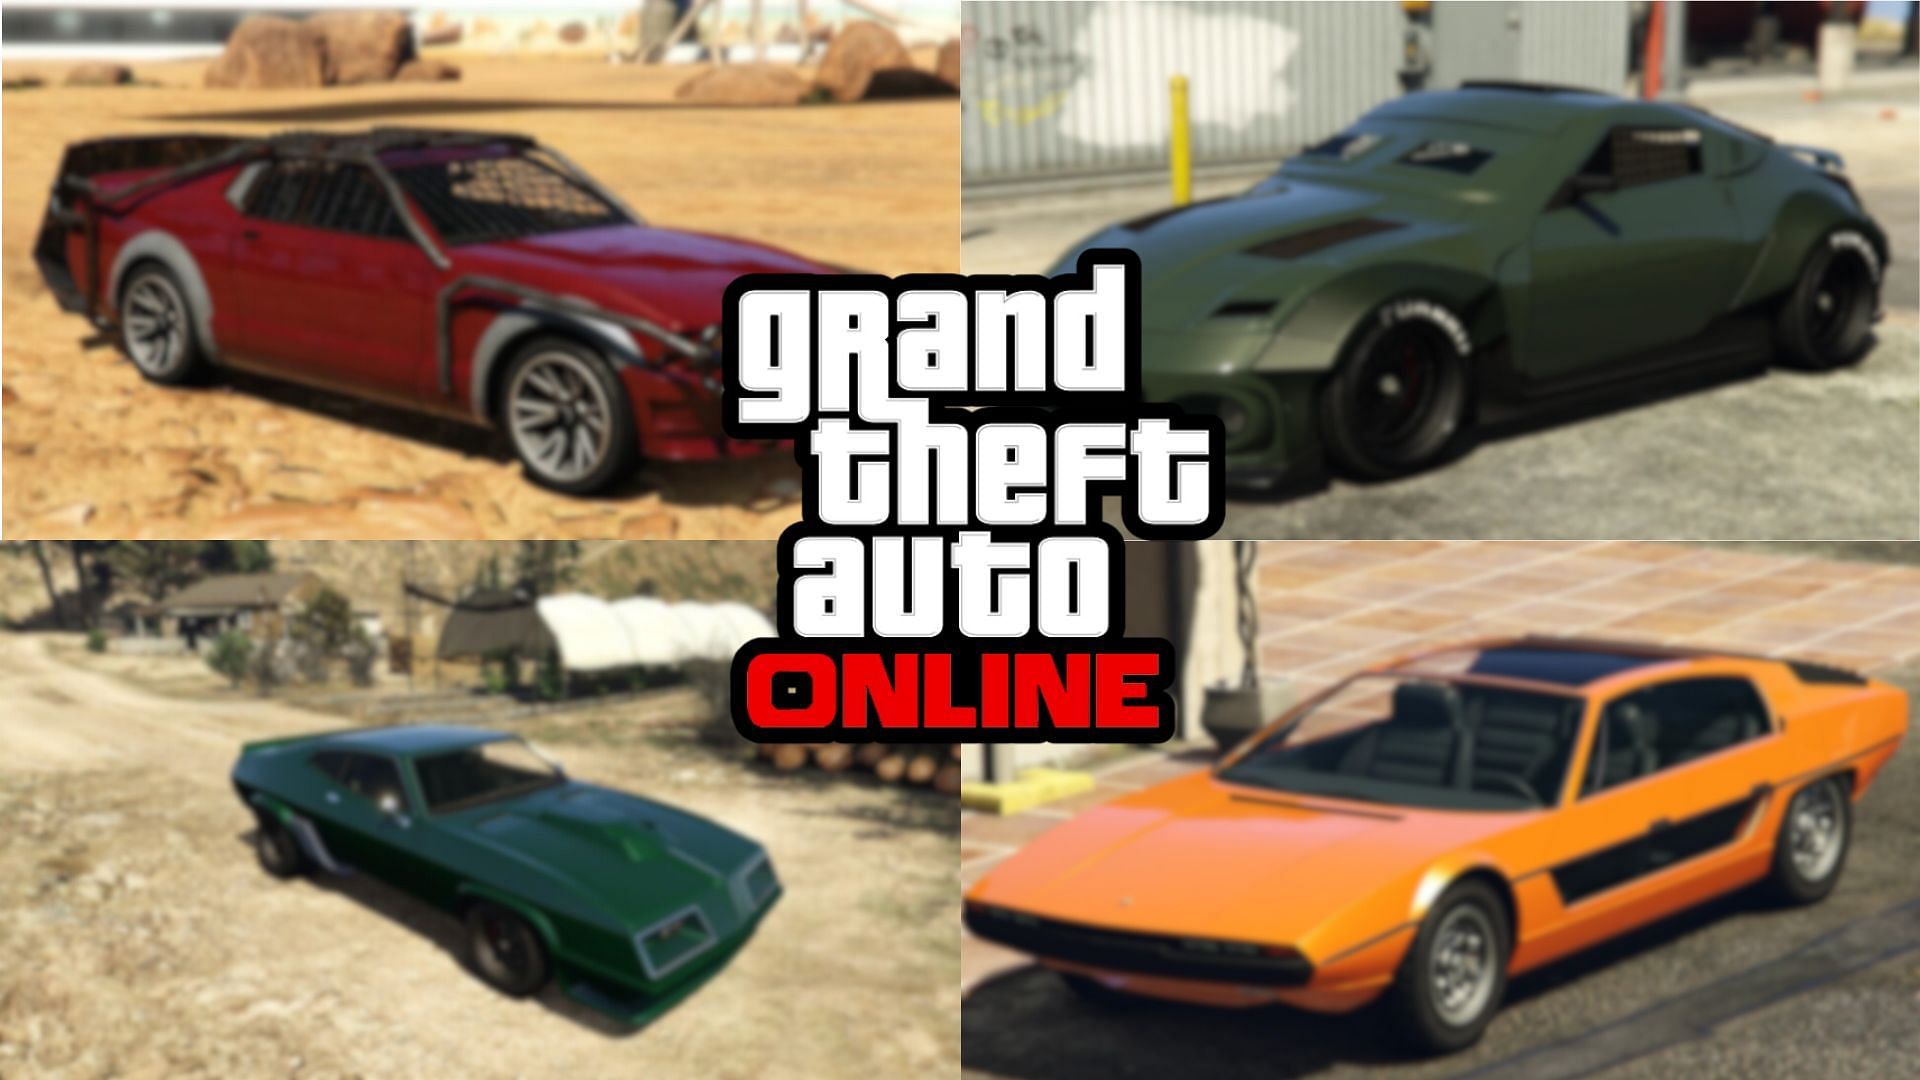 5 fastest armored cars in GTA Online (Fully-Upgraded)